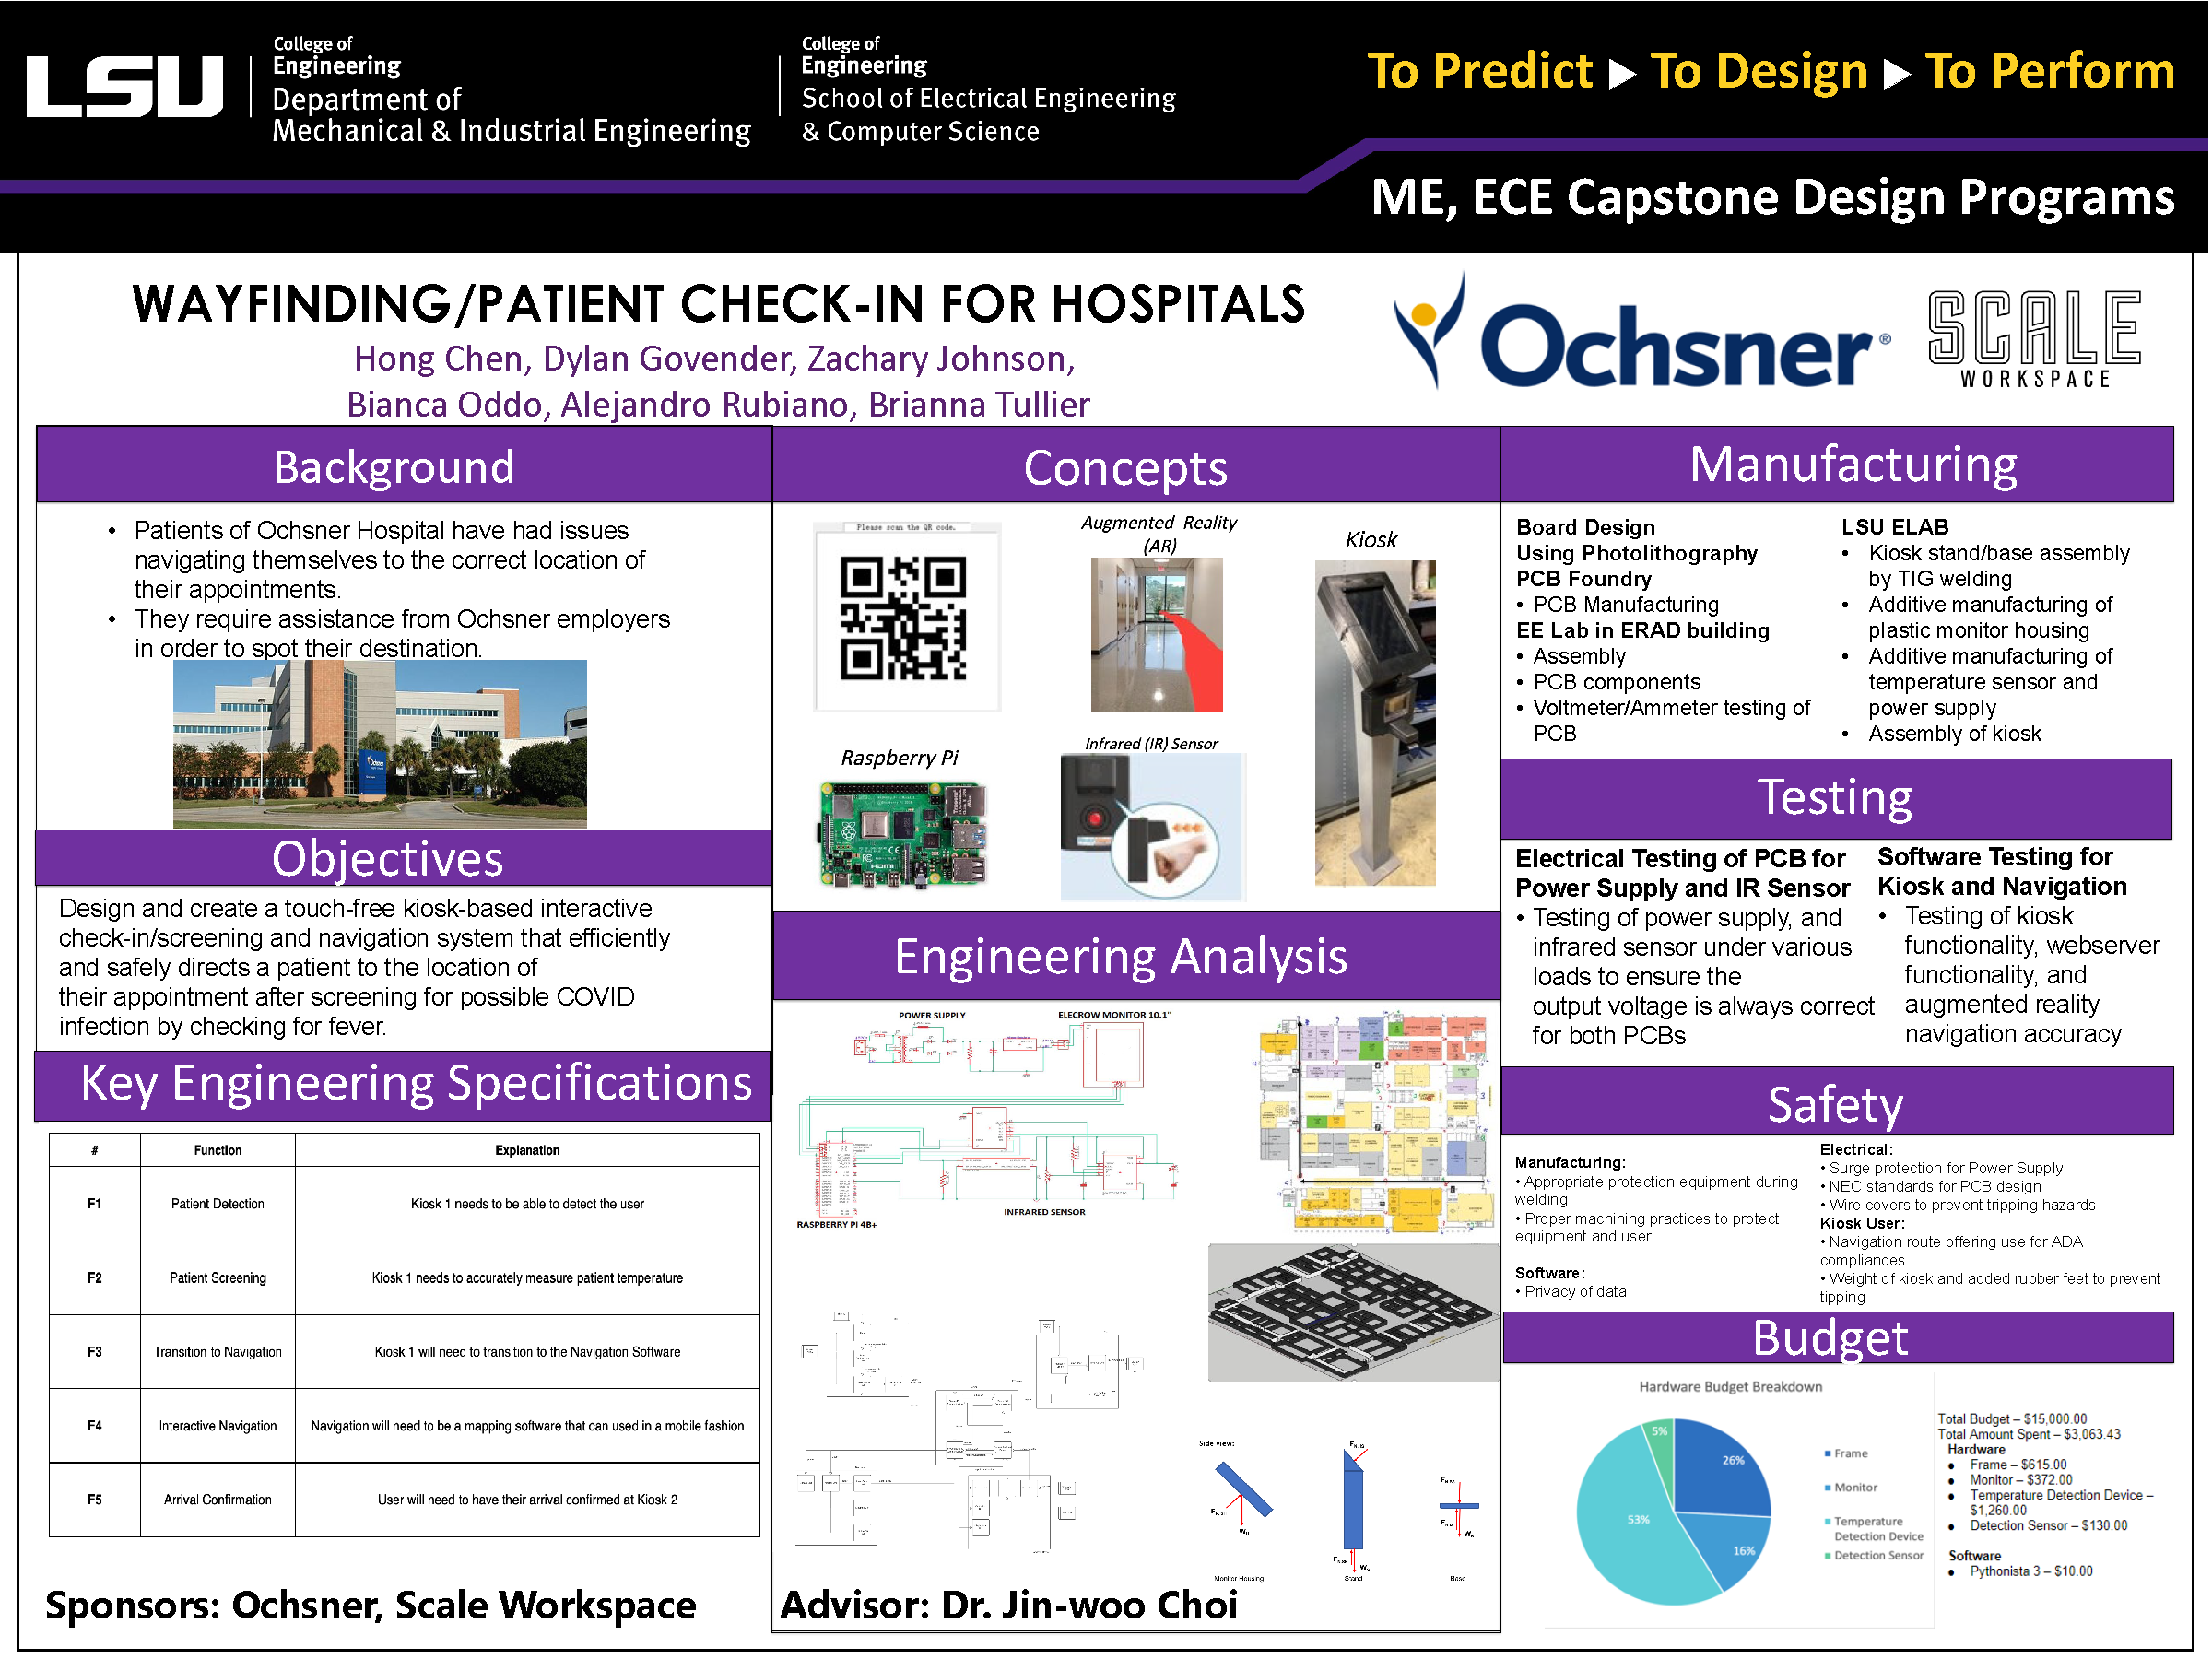 Project 60: Wayfinding/Patient Check-in for Hospitals (2021)